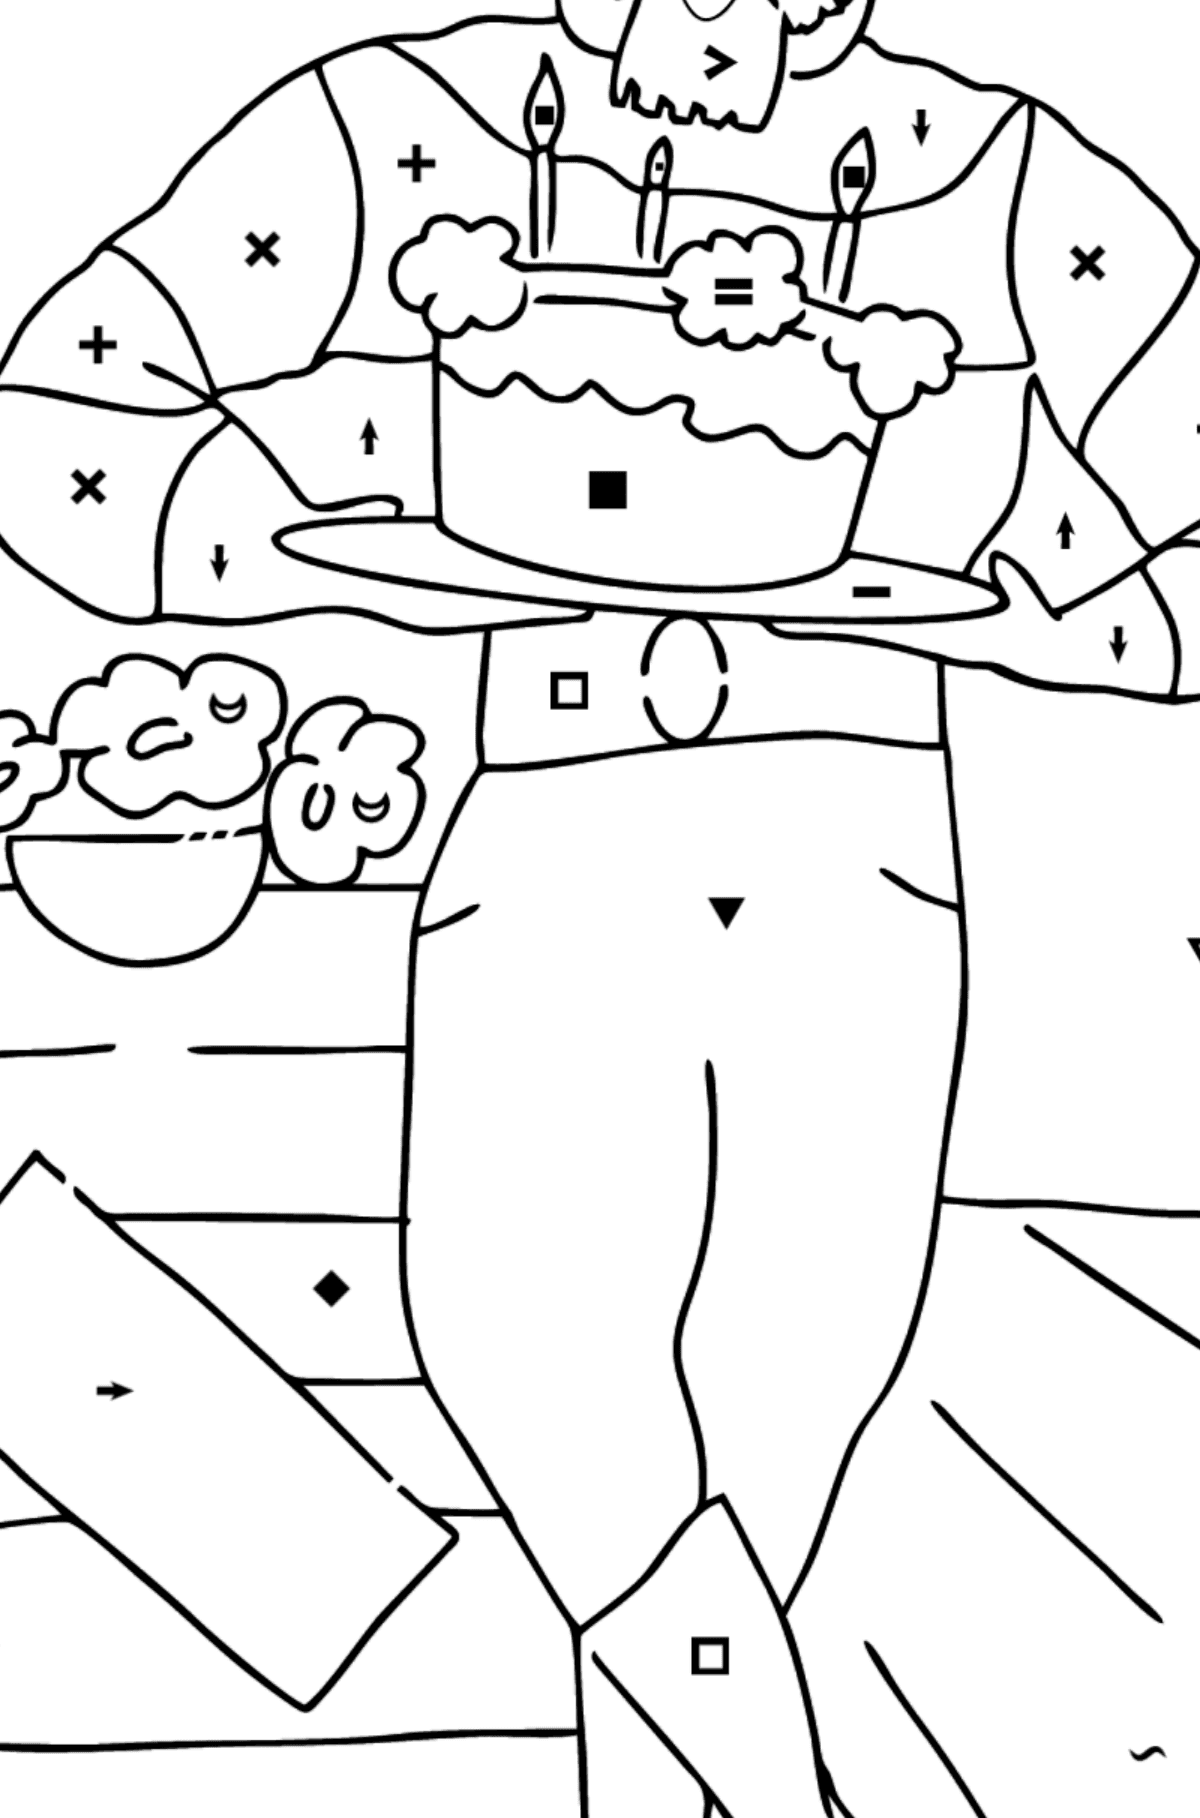 Coloring Page - A Pirate is Waiting for Guests - Coloring by Symbols for Kids